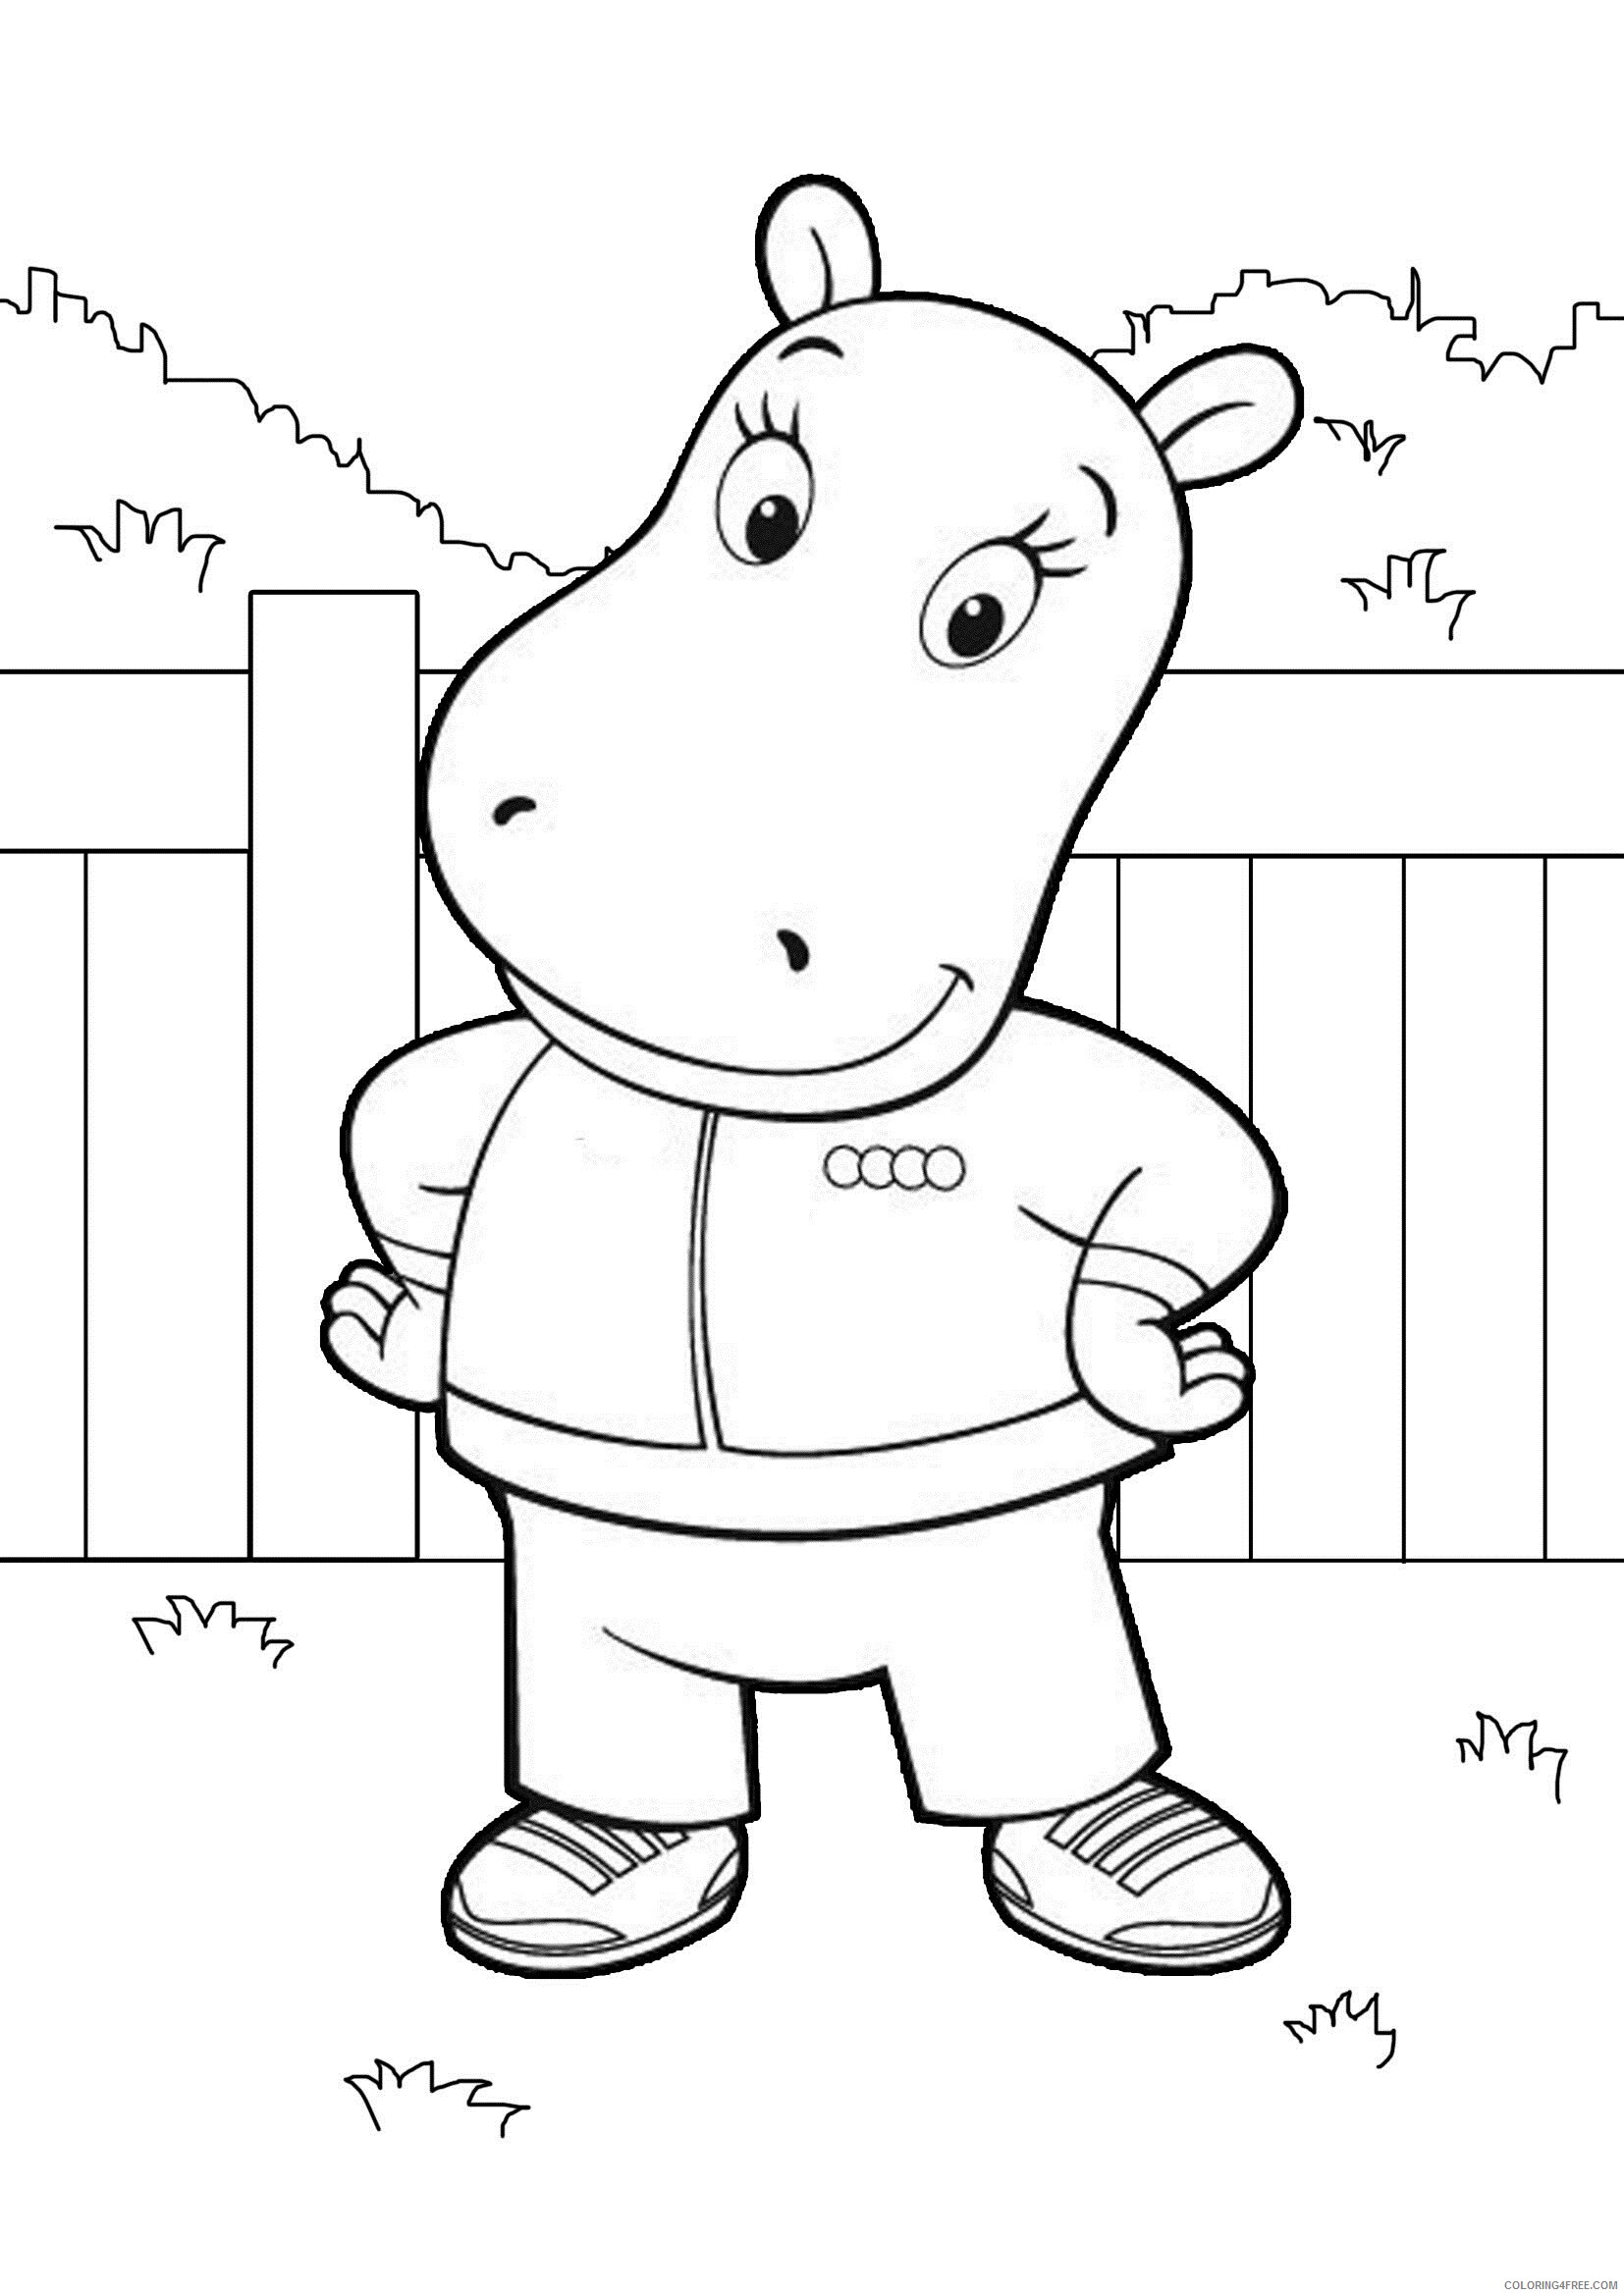 Backyardigans Coloring Pages TV Film Backyardigans Images Printable 2020 00527 Coloring4free